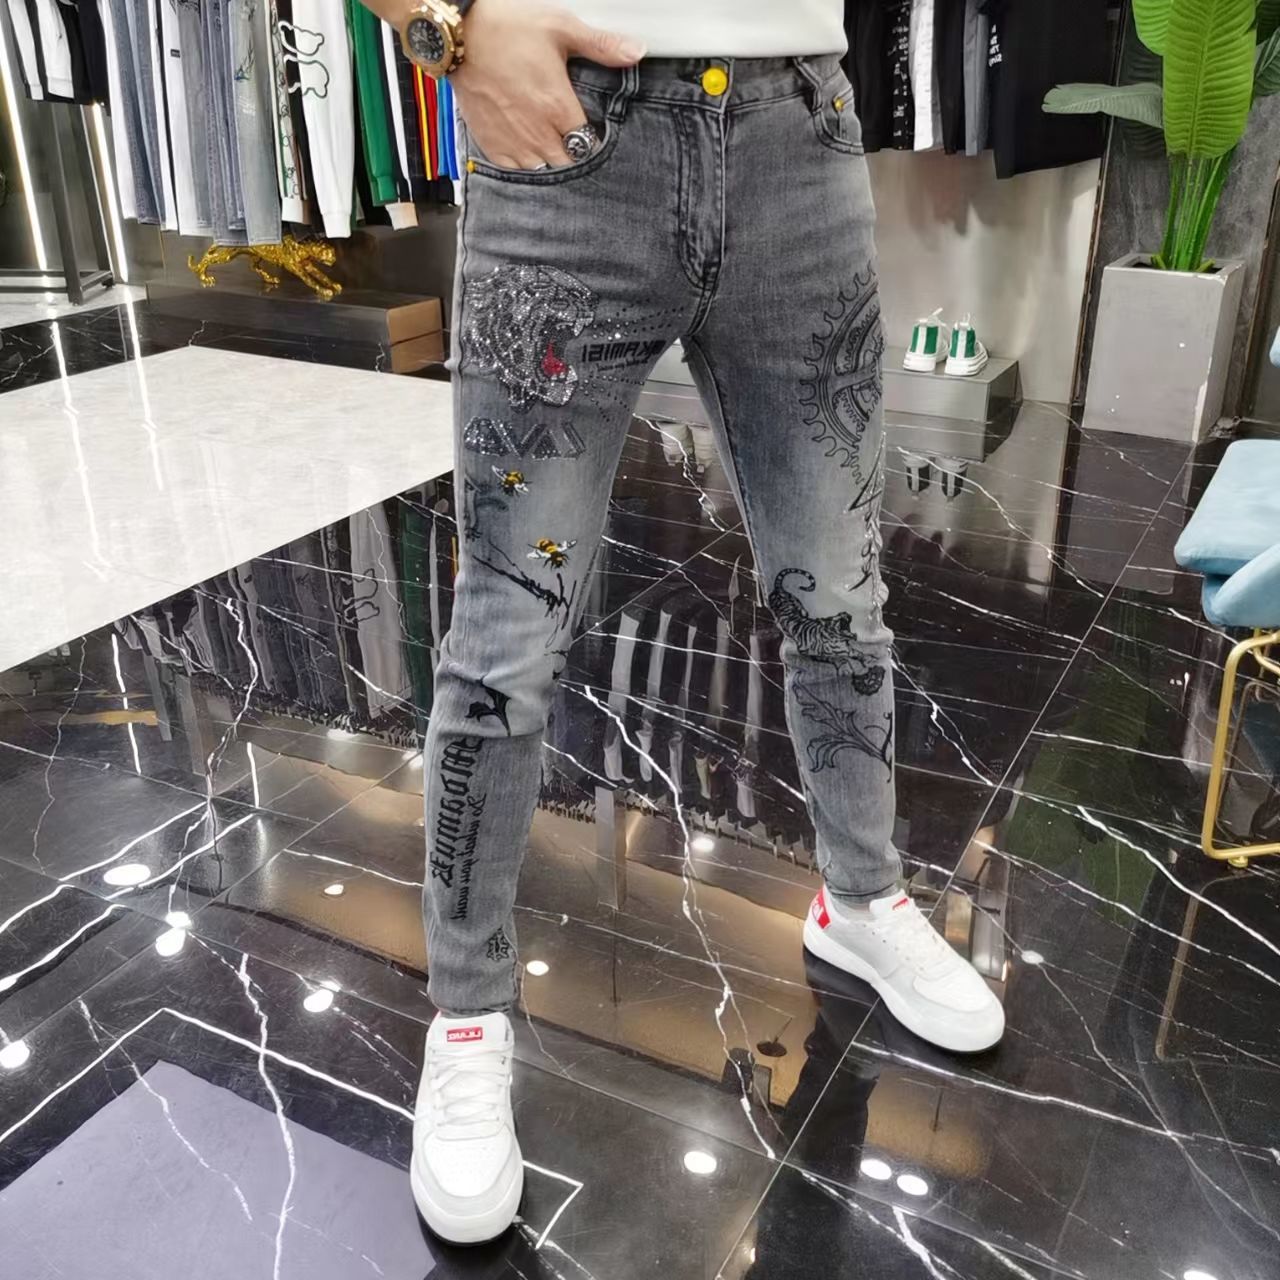 Men’s European station four seasons European goods fashion brand jeans men heavy industry tiger hot drill trend grey slim pants with small fee Featured Image